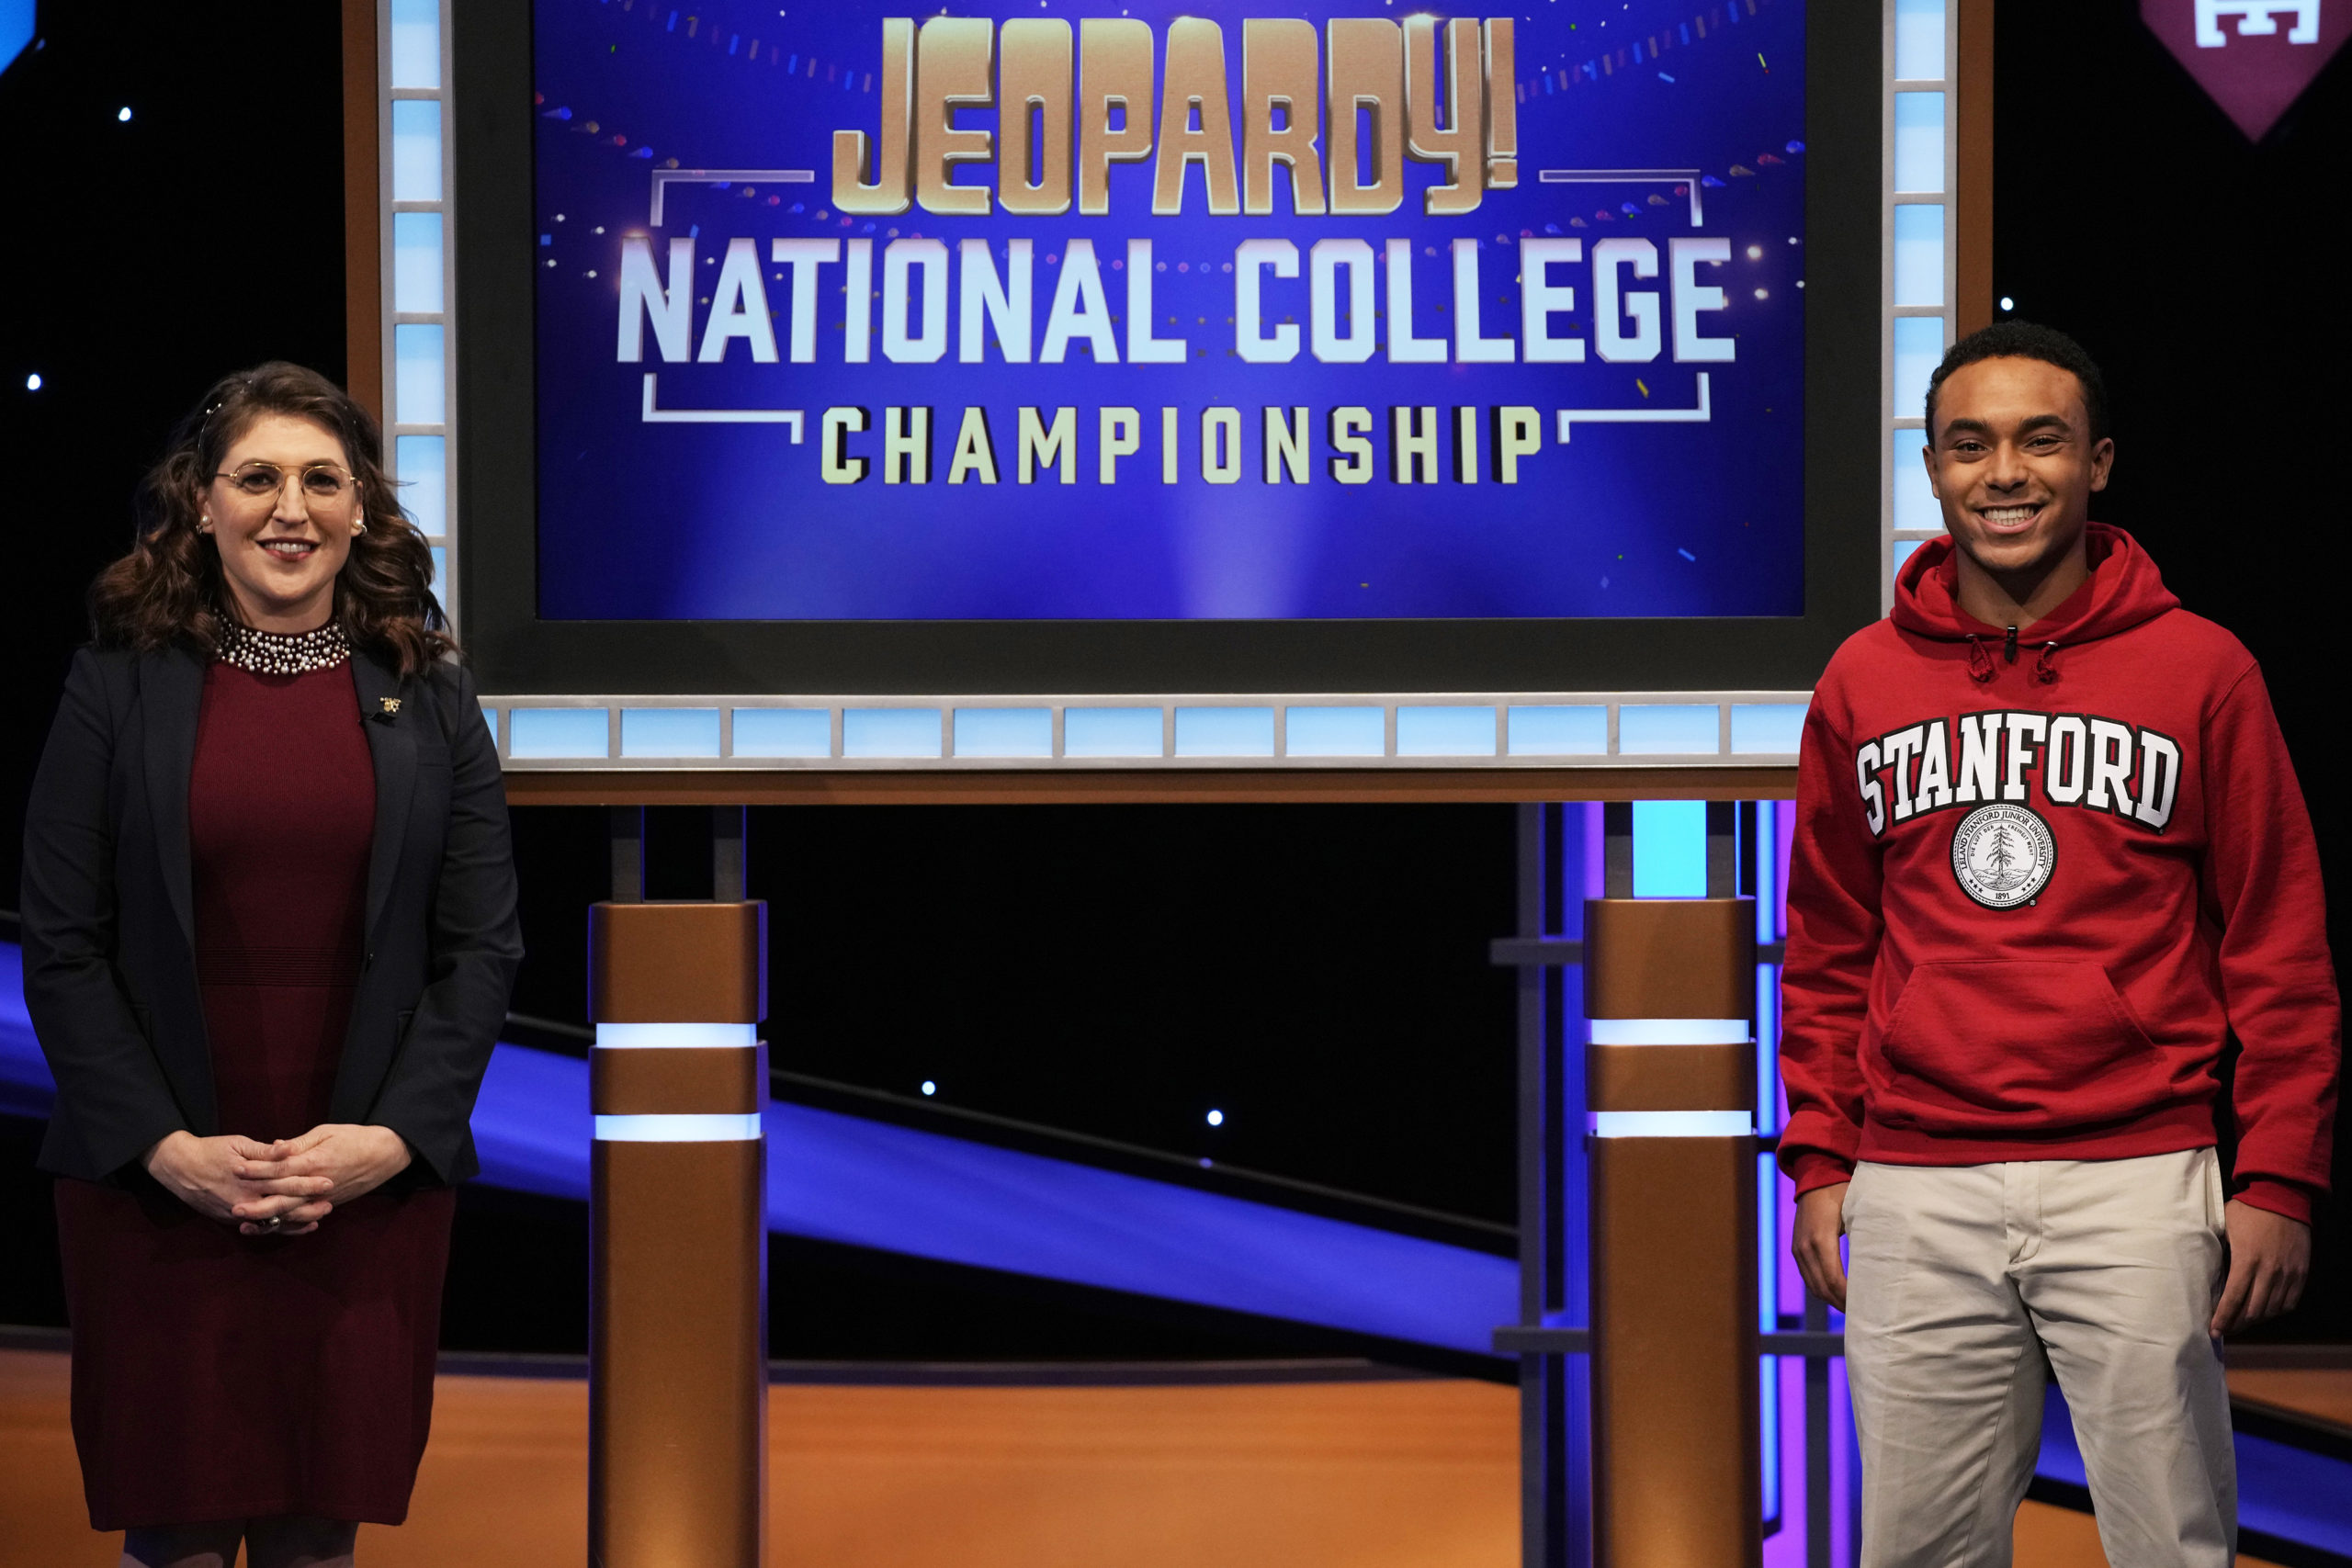 Tuesday Ratings The Winter Olympics Lag; 'Jeopardy!' National College